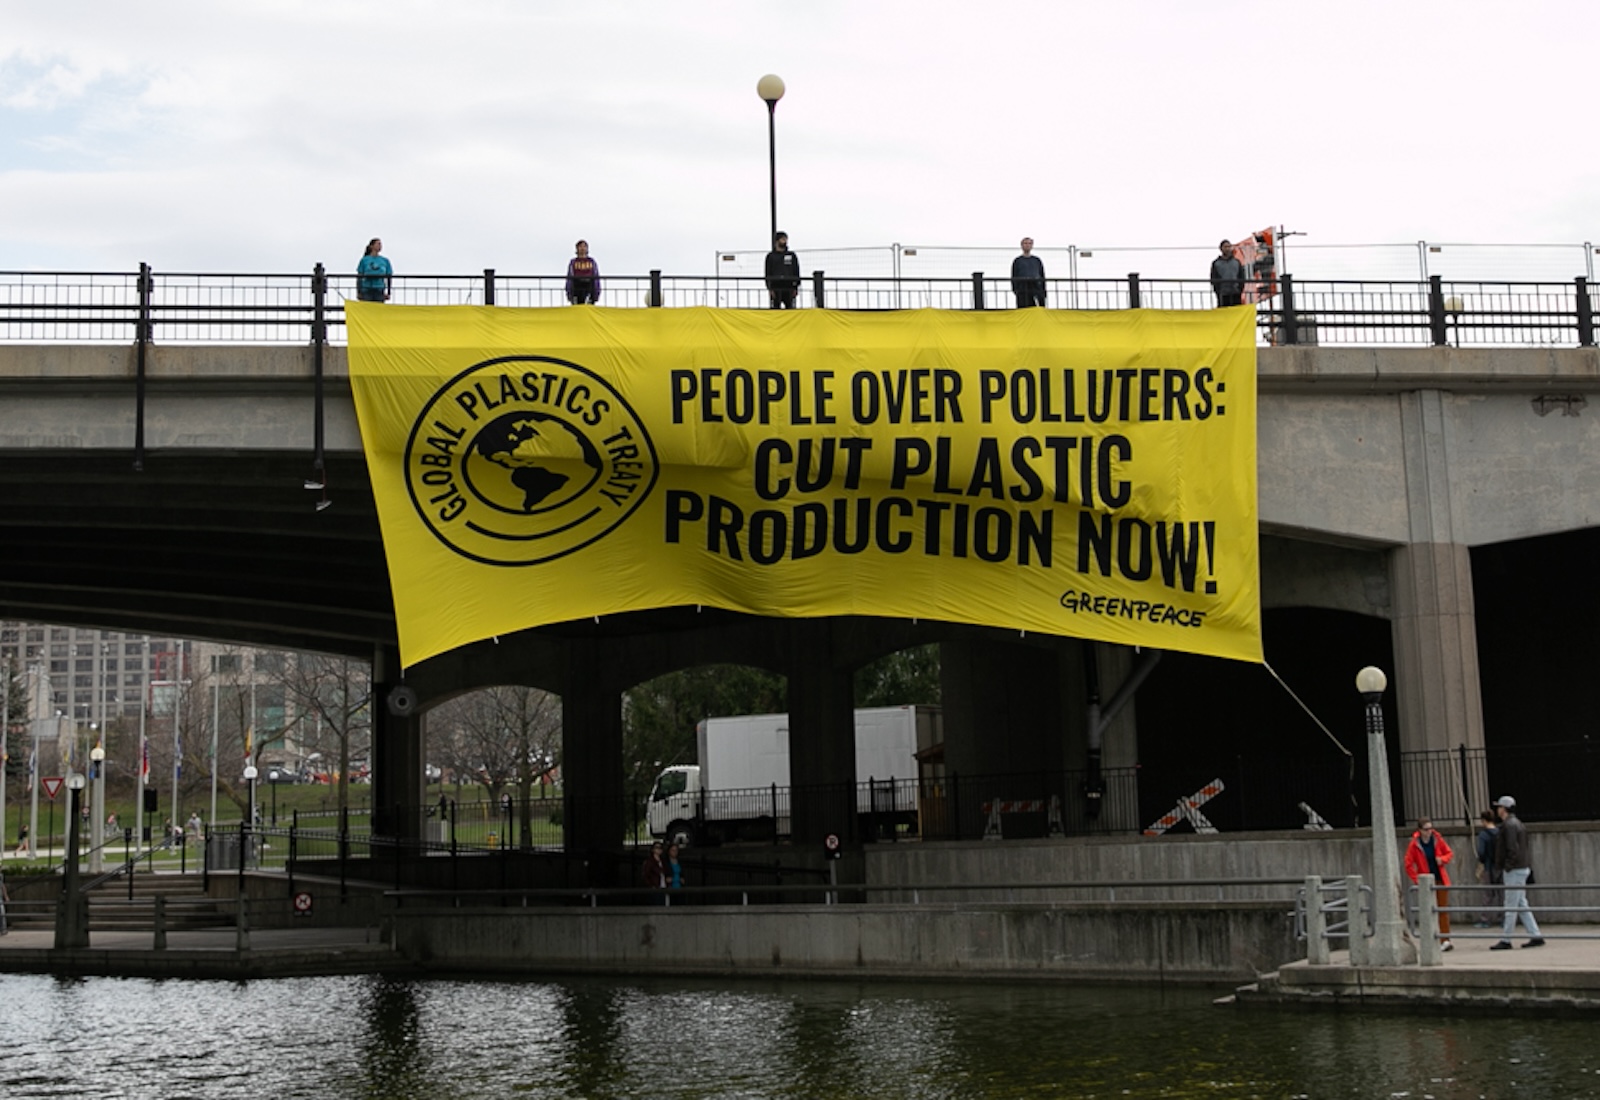 Greenpeace protestors hang a yellow banner that says 'People Over Polluters: Cut Plastic Production Now!' from a bridge